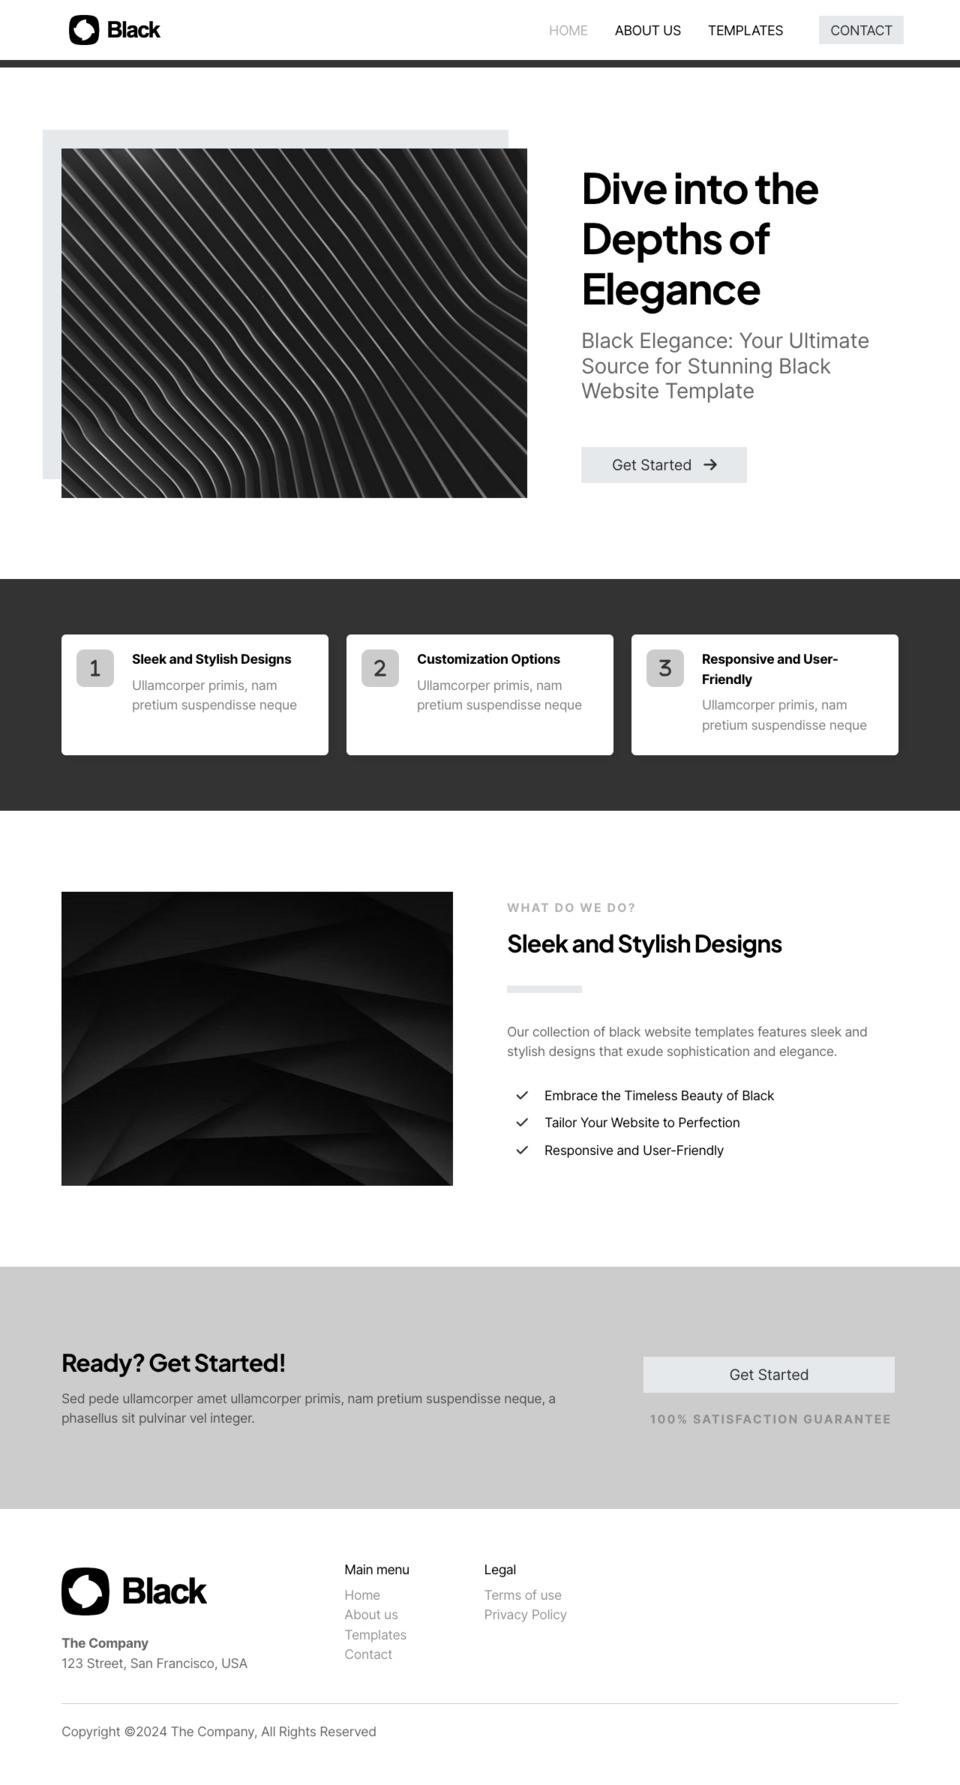 Black Website Template - Ideal for businesses looking to convey authority, modernity, and a sense of mystery. Perfect for luxury brands, high-quality products, and businesses that want to capture attention.